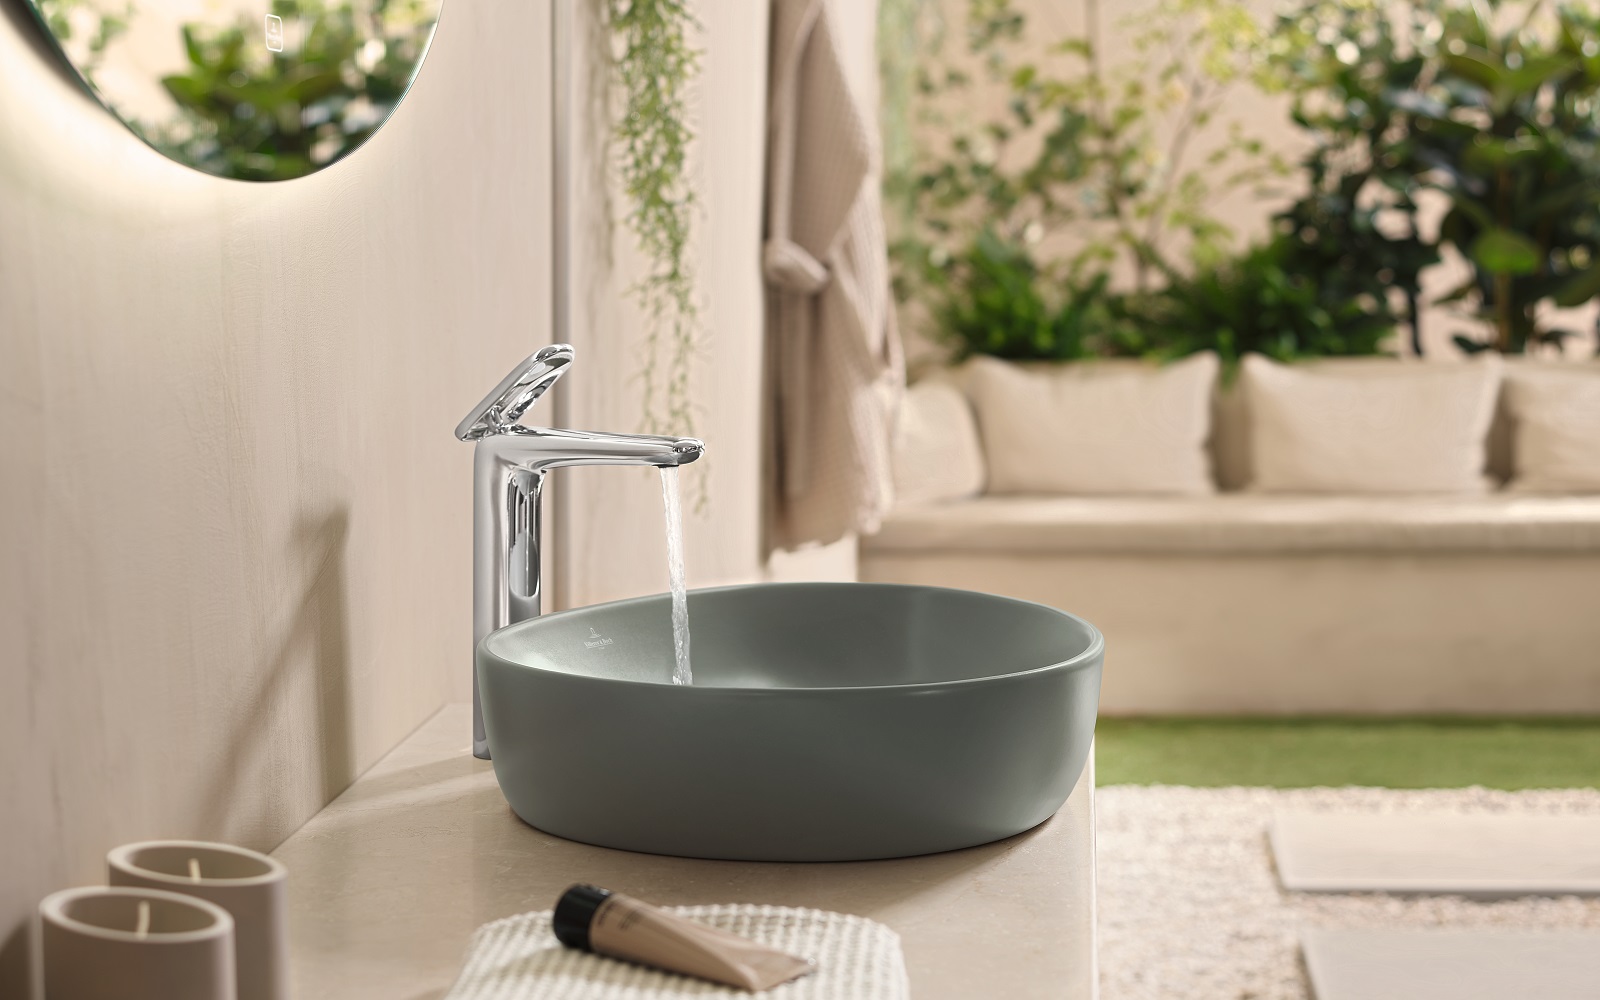 moss green rounded washbasin by villeroy & boch with water from tap and greenery in the background